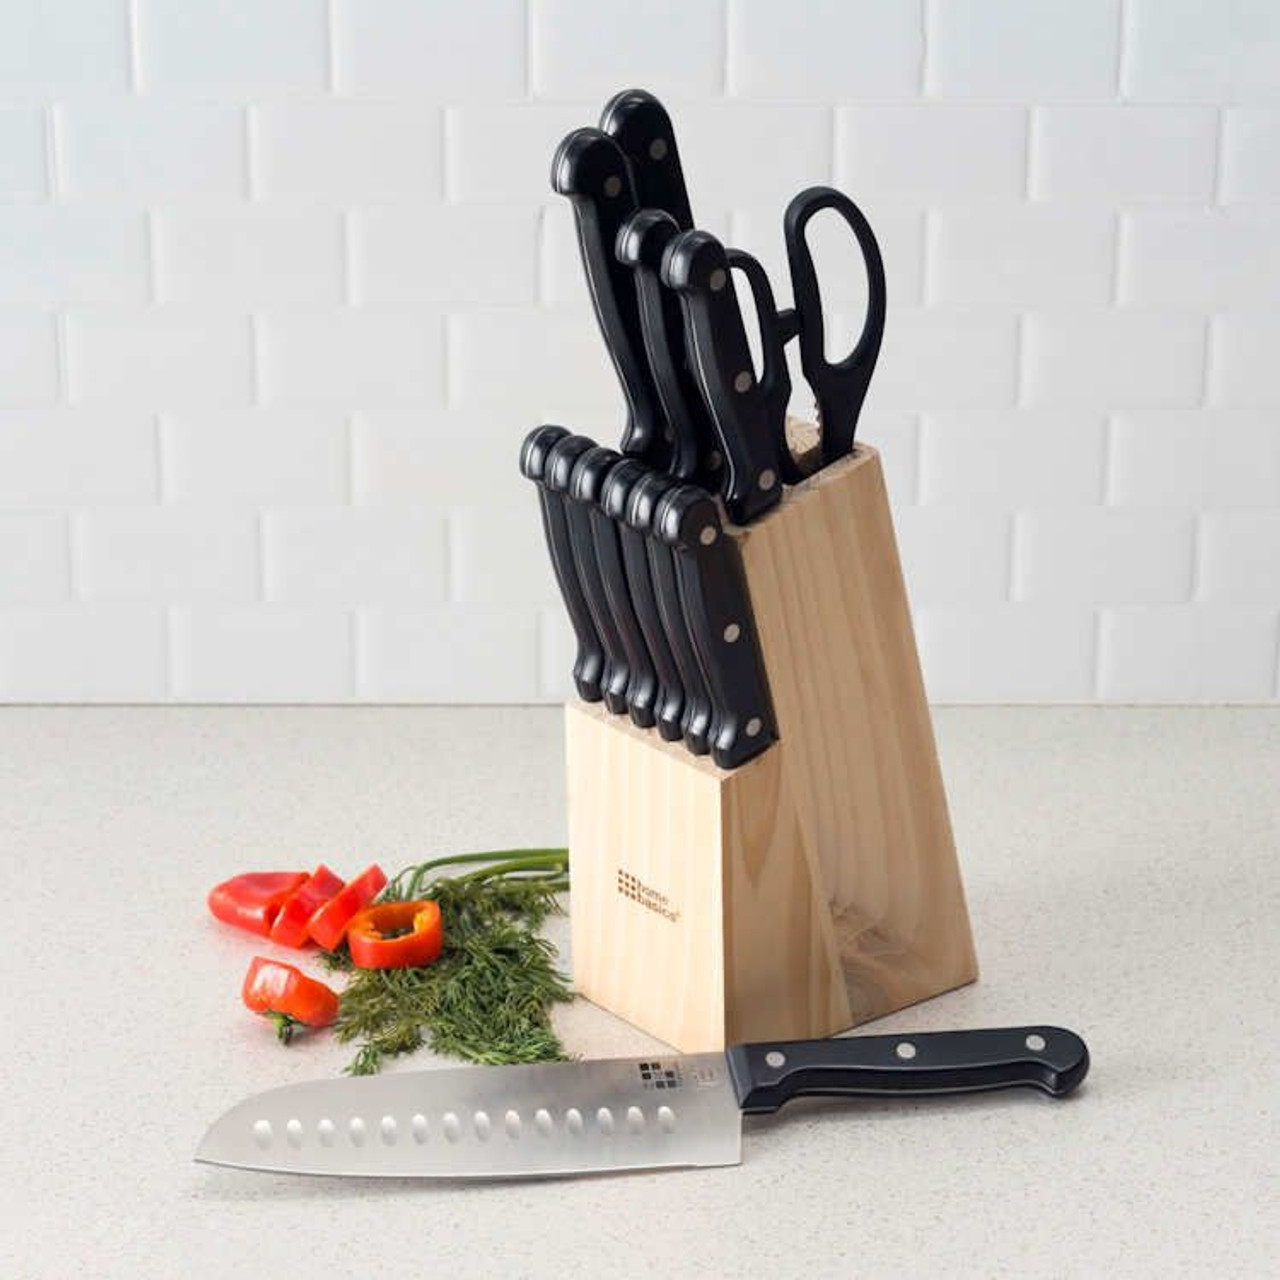 https://cdn11.bigcommerce.com/s-q0oajb576s/images/stencil/1280x1280/products/1233/3468/home-basics-13-pc-knife-block-sets-shown-on-kitchen-counter-1__94841.1637184253.jpg?c=1?imbypass=on